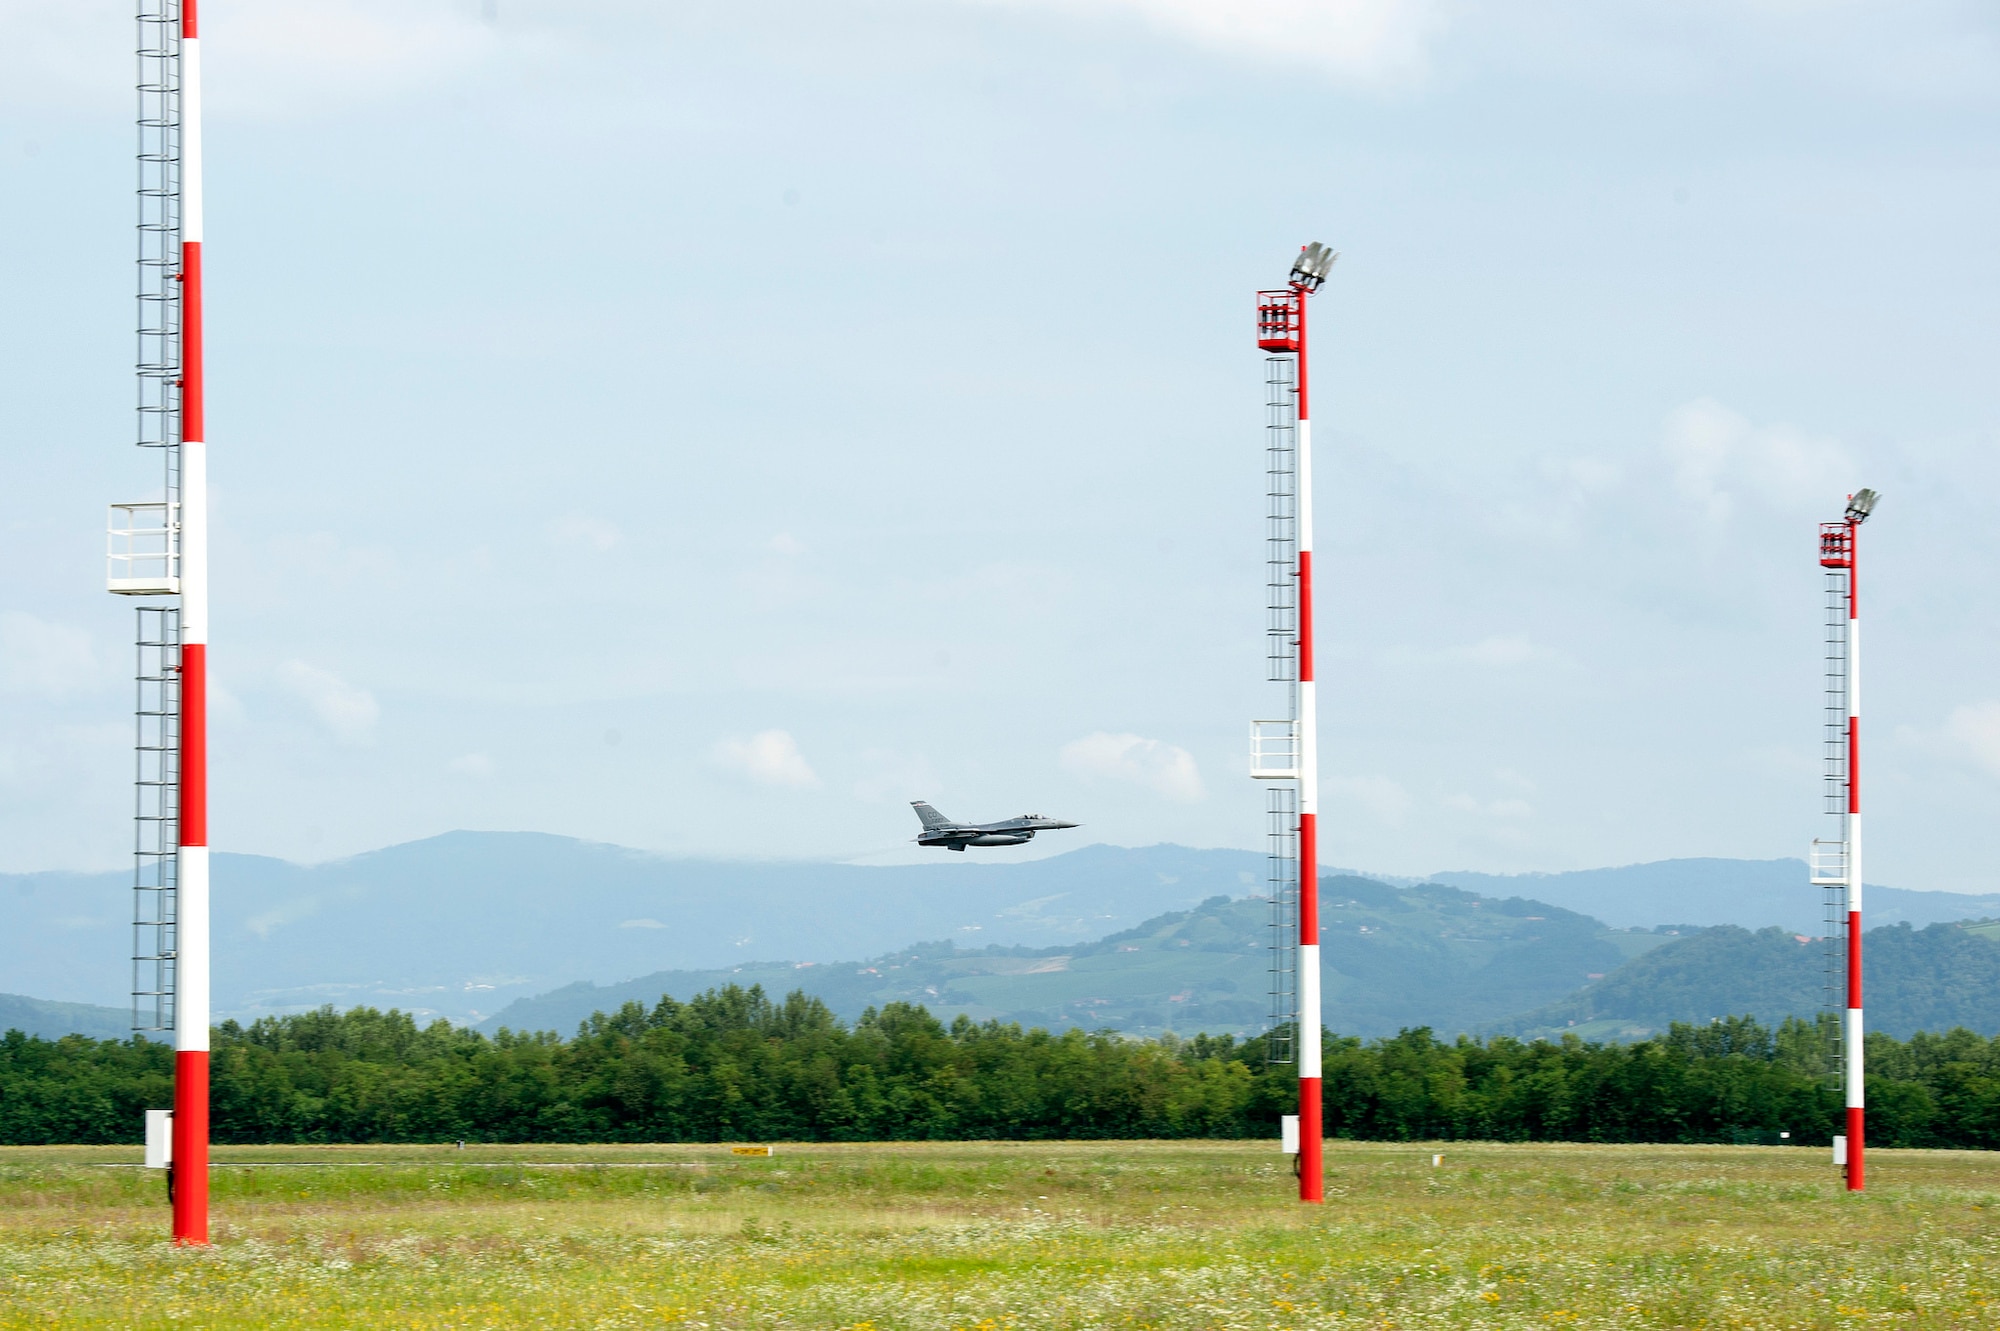 An F-16 Fighting Falcon from the 120th Fighter Squadron, 140th Wing, Colorado Air National Guard, does a low pass fly-by before landing, Cerkjle ob Krki Air Base, Slovenia, 25 July, 2016. The 140th Wing F-16 Fighting Falcons made history when they became the first F-16s to ever land at Cerkjle AB. The 140th WG is currently deployed to Hungary to train with NATO allies in Slovenia, Hungary, Slovakia and the Czech Republic in conjunction with Panther Strike 2016 and Operation Atlantic Resolve. (U.S. Air National Guard photo by Senior Master Sgt. John Rohrer)